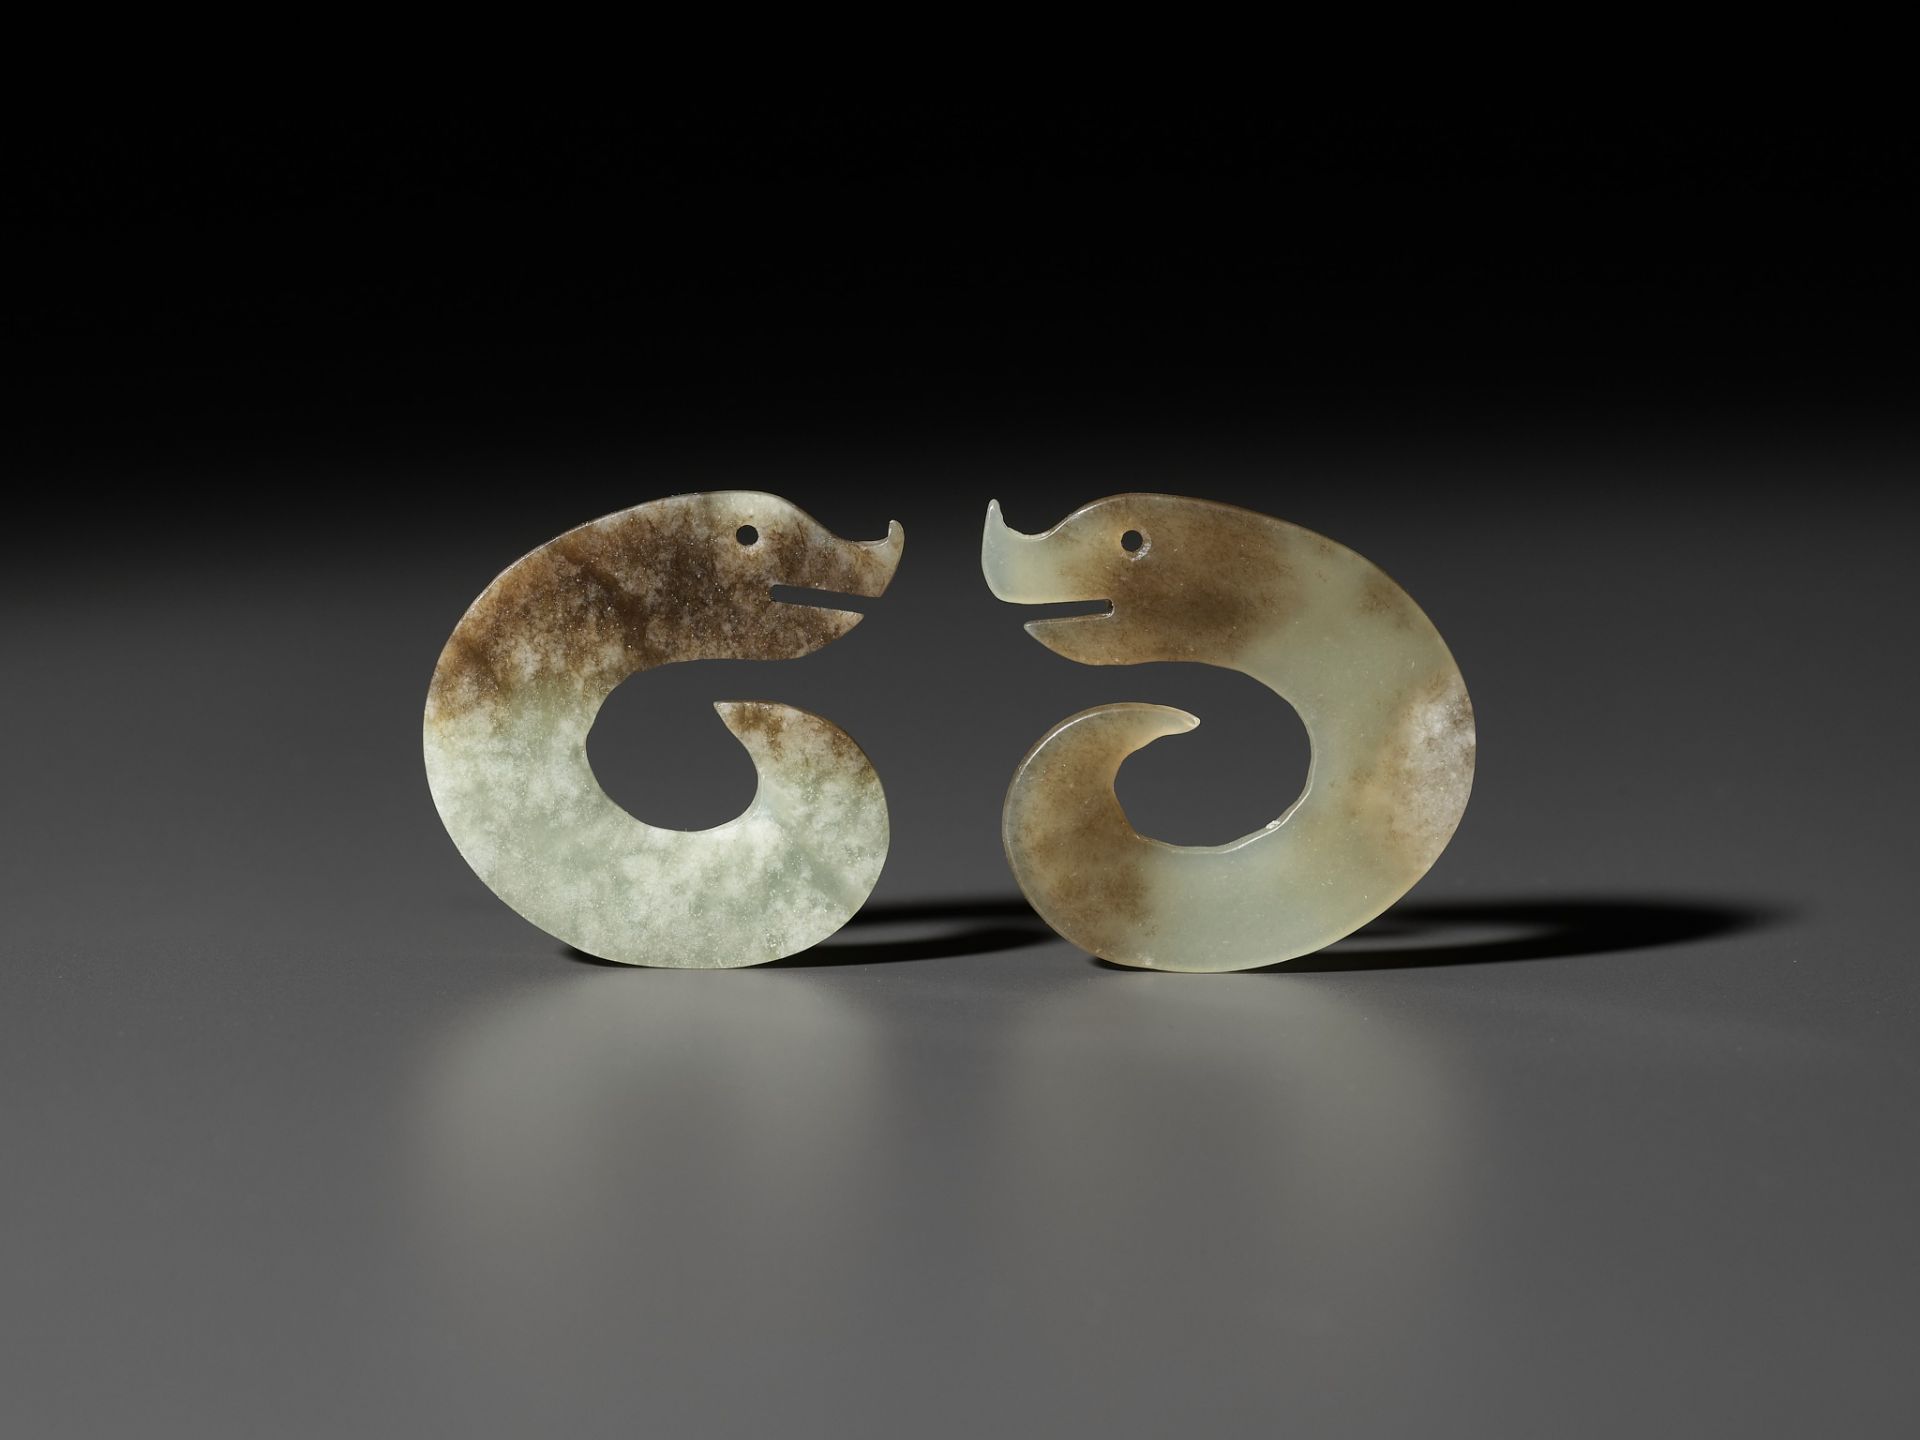 A PAIR OF C-SHAPED 'DRAGON' PENDANTS, ERLITOU PERIOD TO SHANG DYNASTY - Image 3 of 9